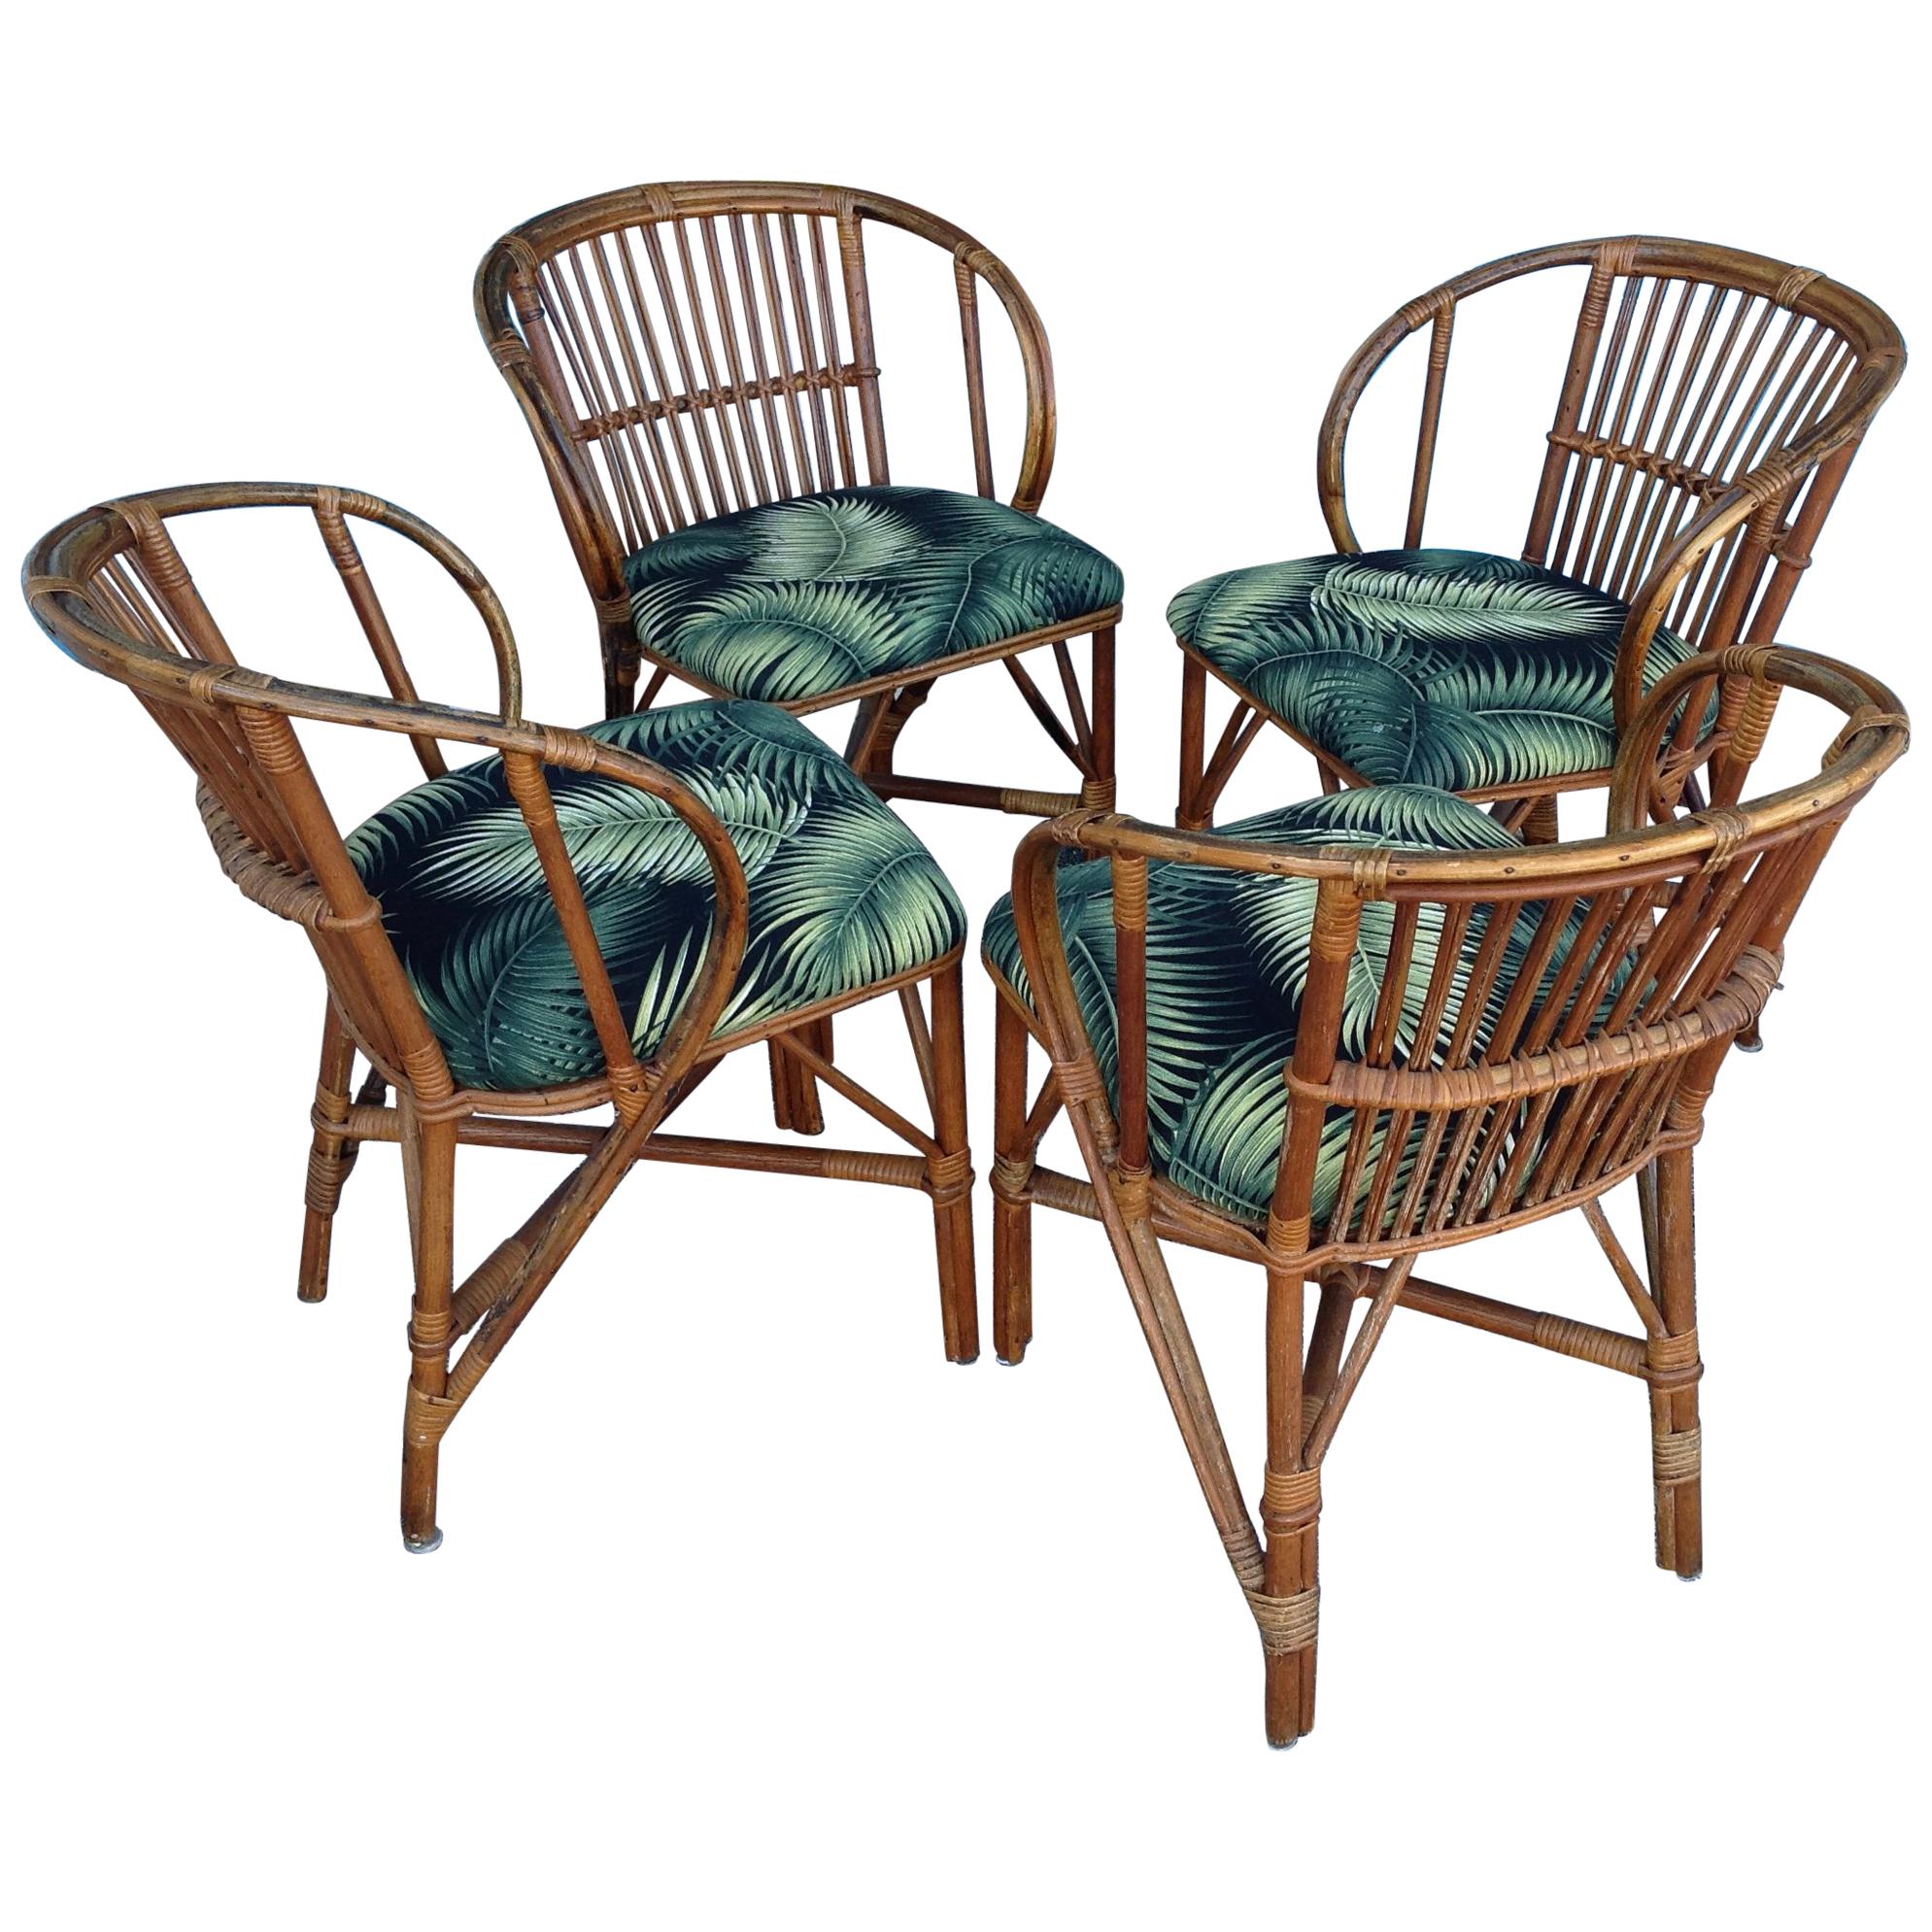 Set of 4 Stick Rattan Game Table Chairs